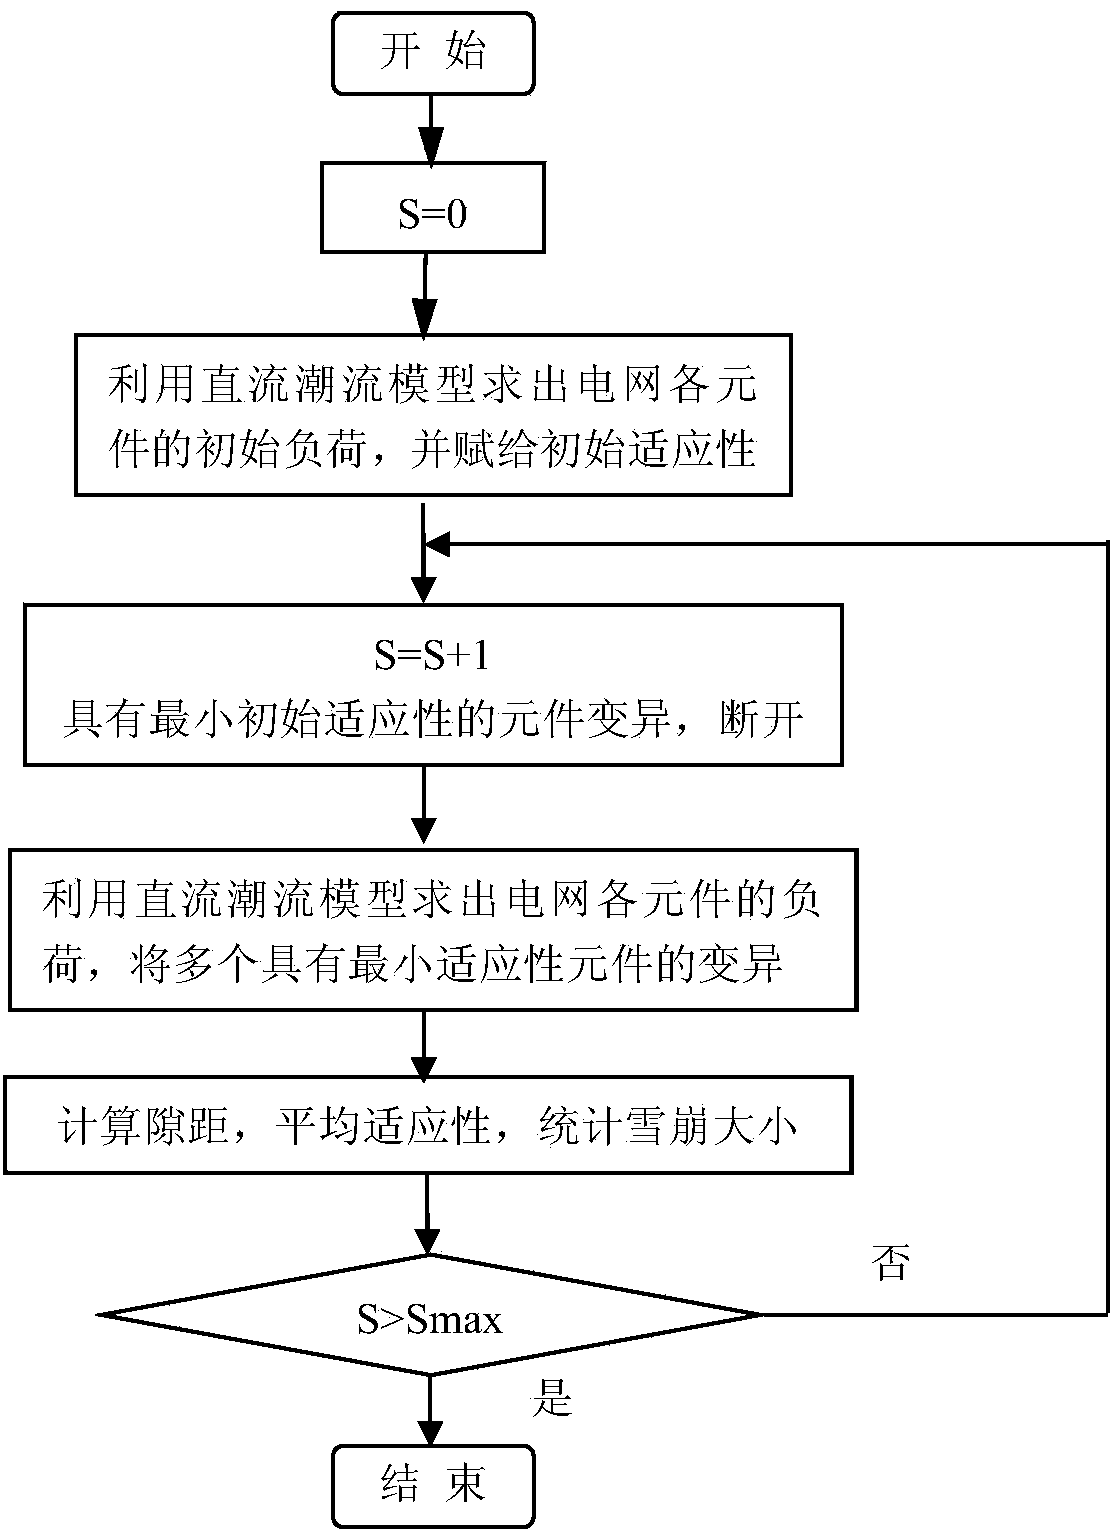 Self-organization critical state judgment method of power system